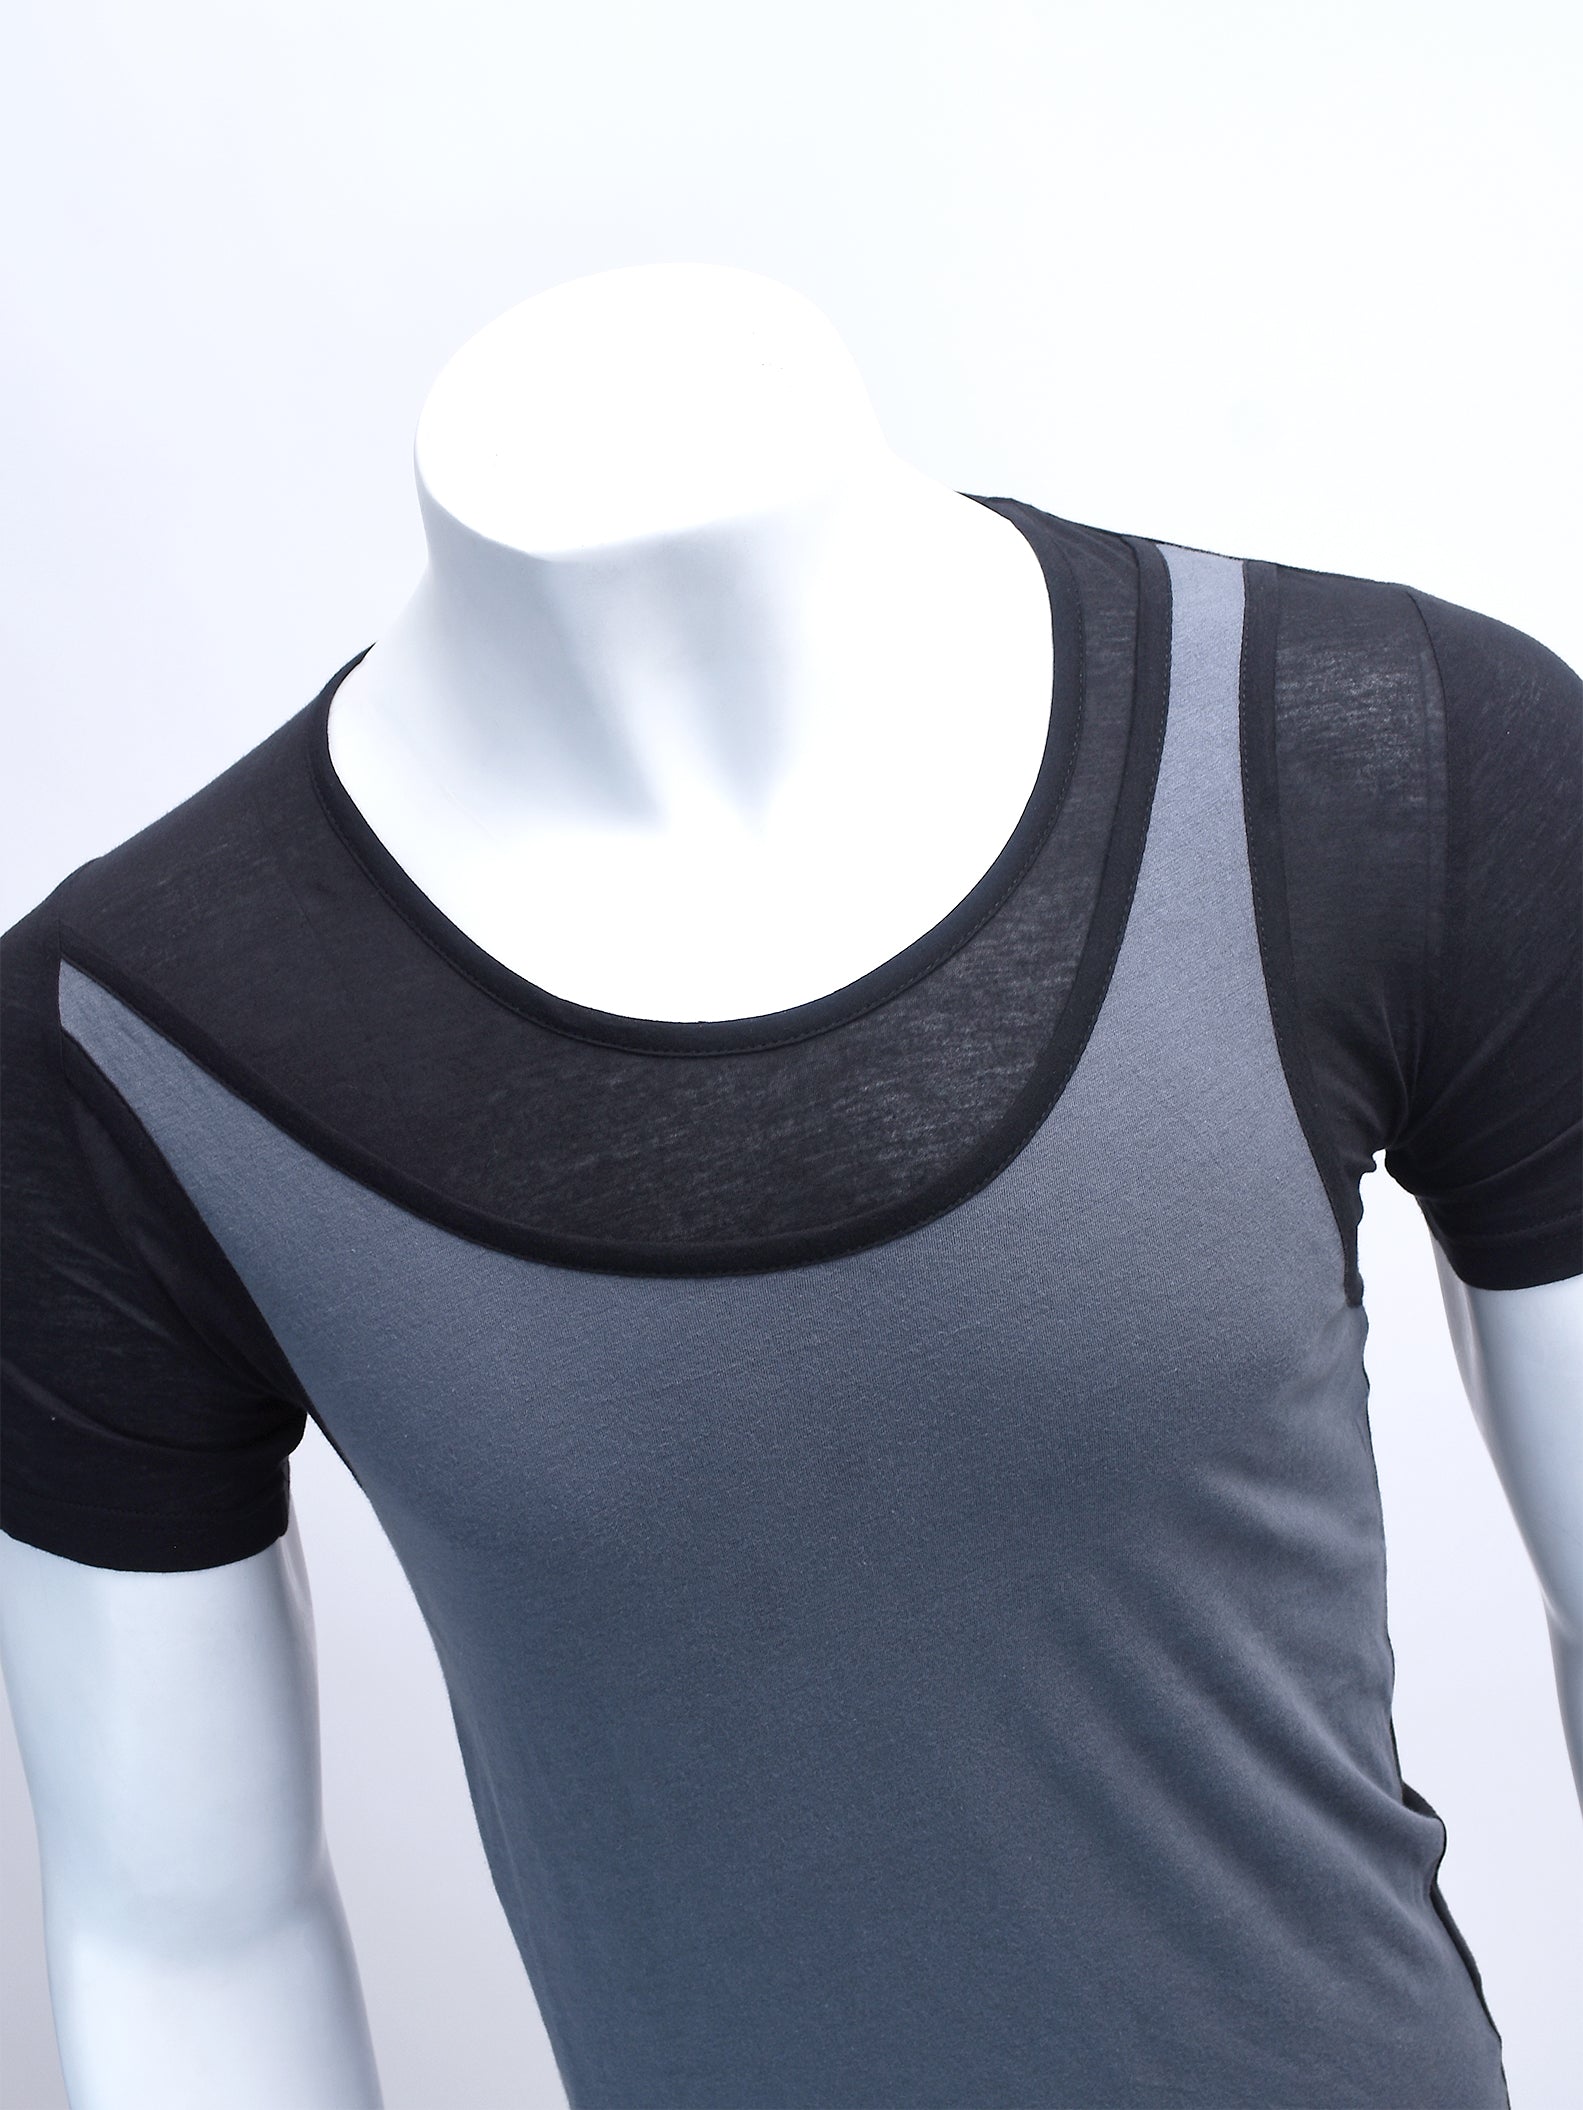 BLACK AND GREY VEST LAYERED T-SHIRT